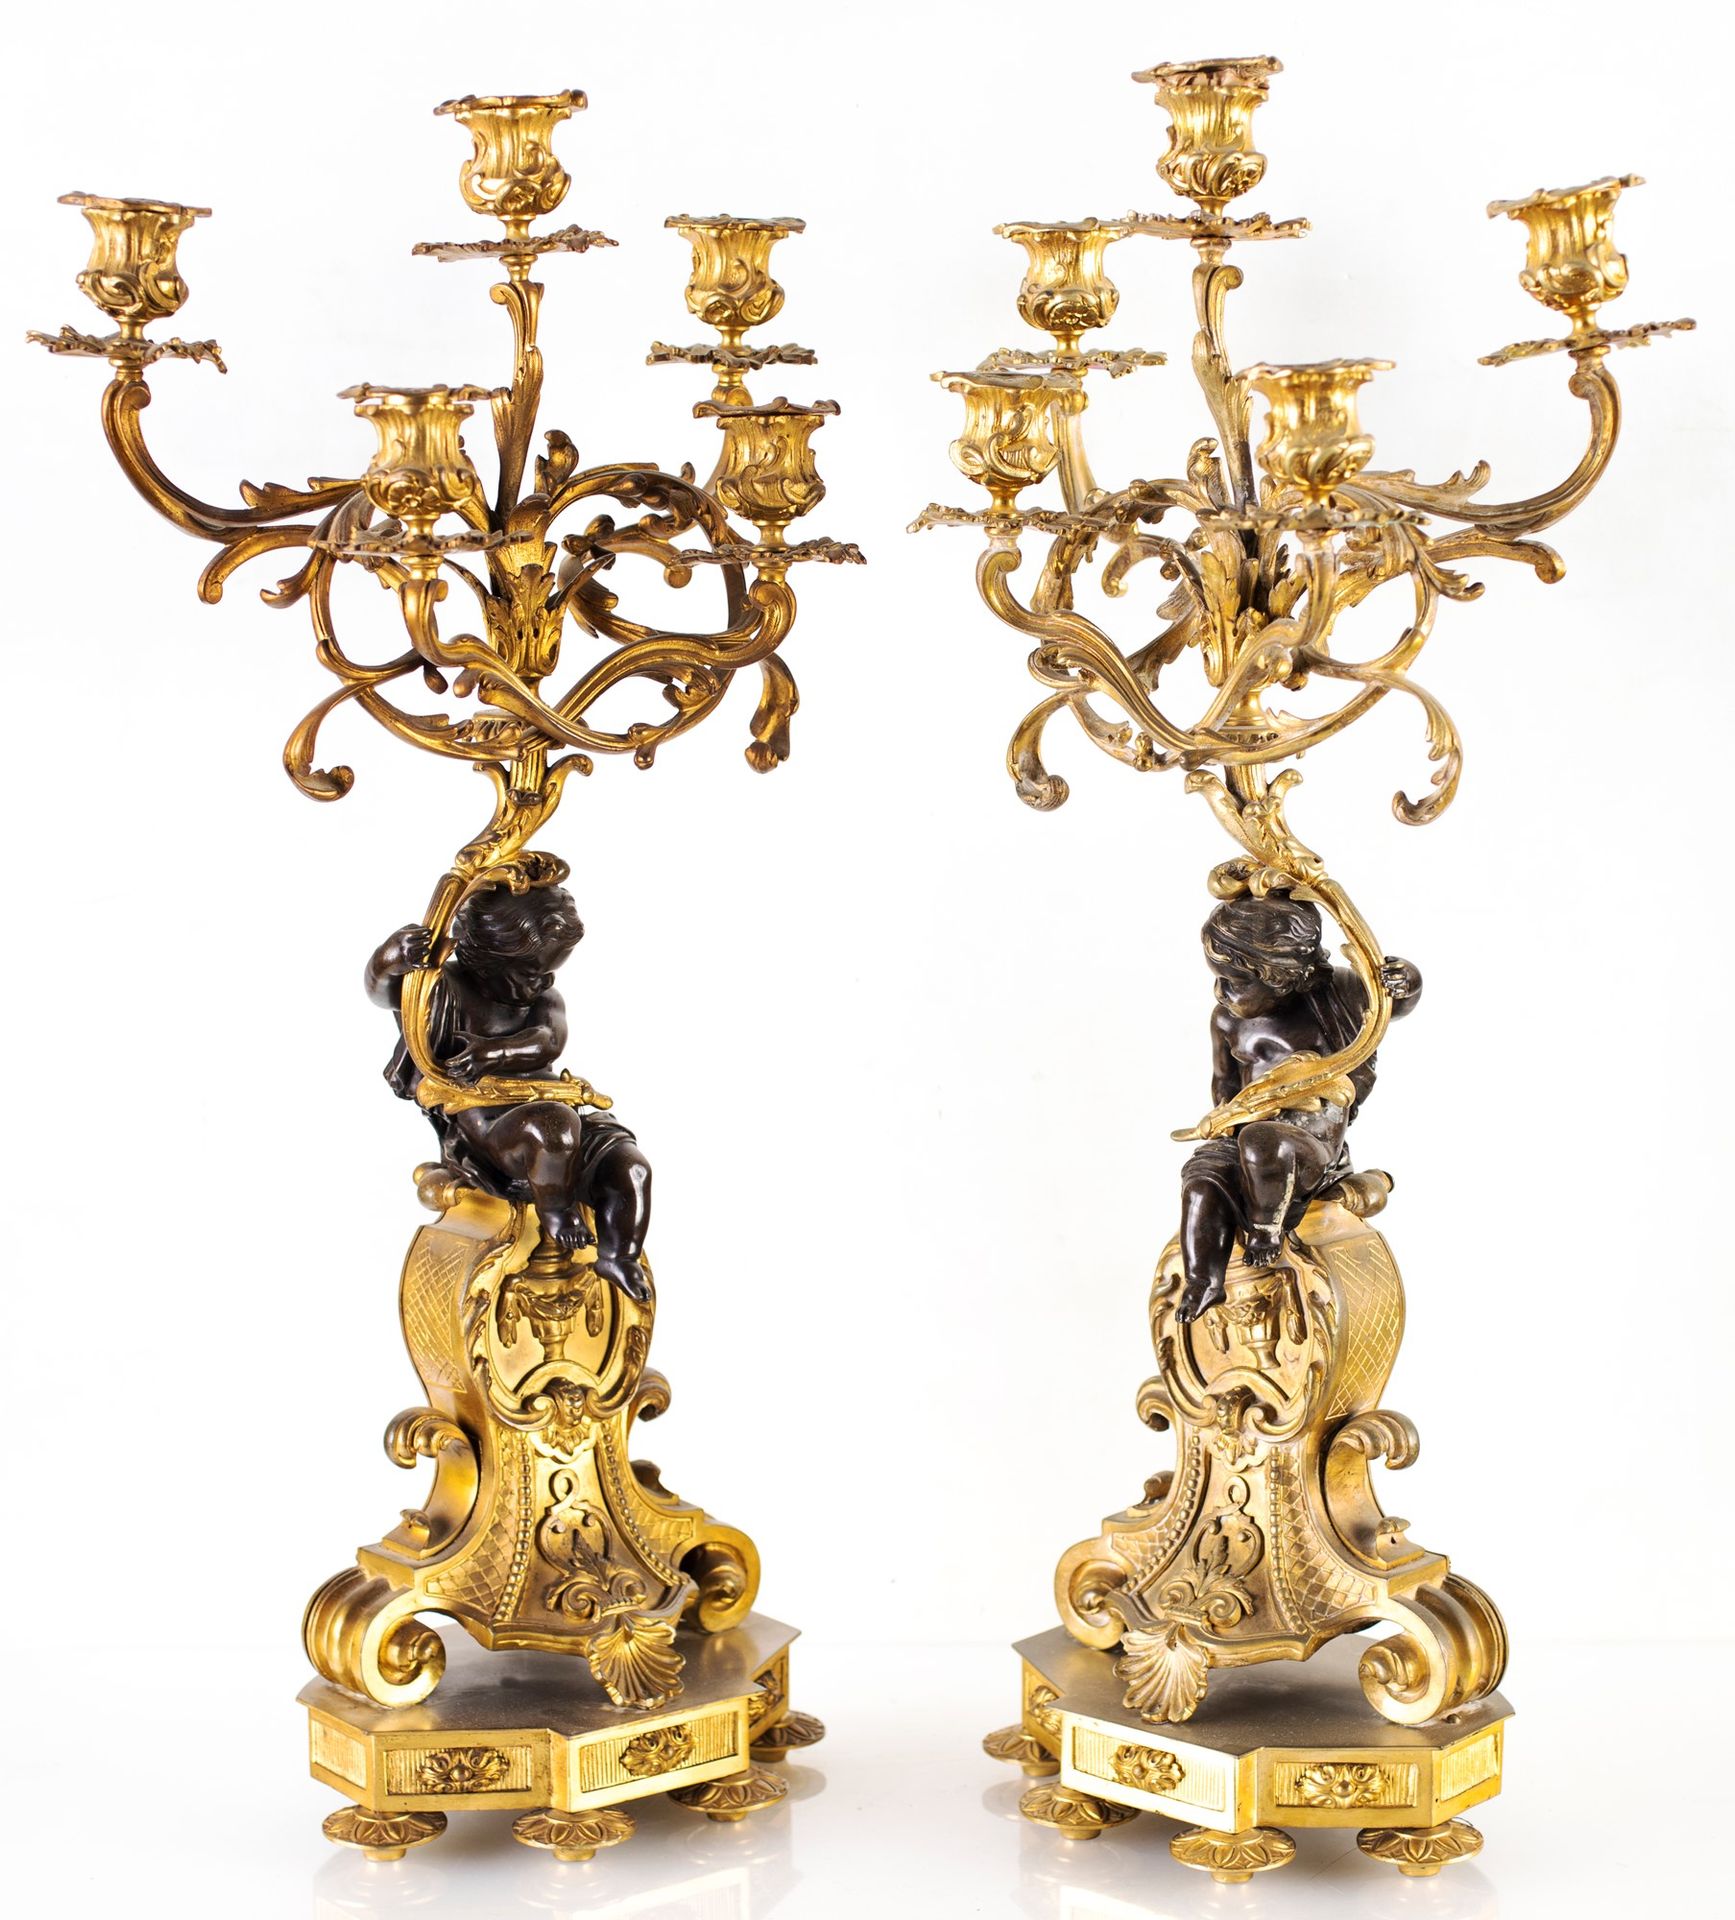 Pair of gilt bronze candelabra, 19th century with five arms supported by burnish&hellip;